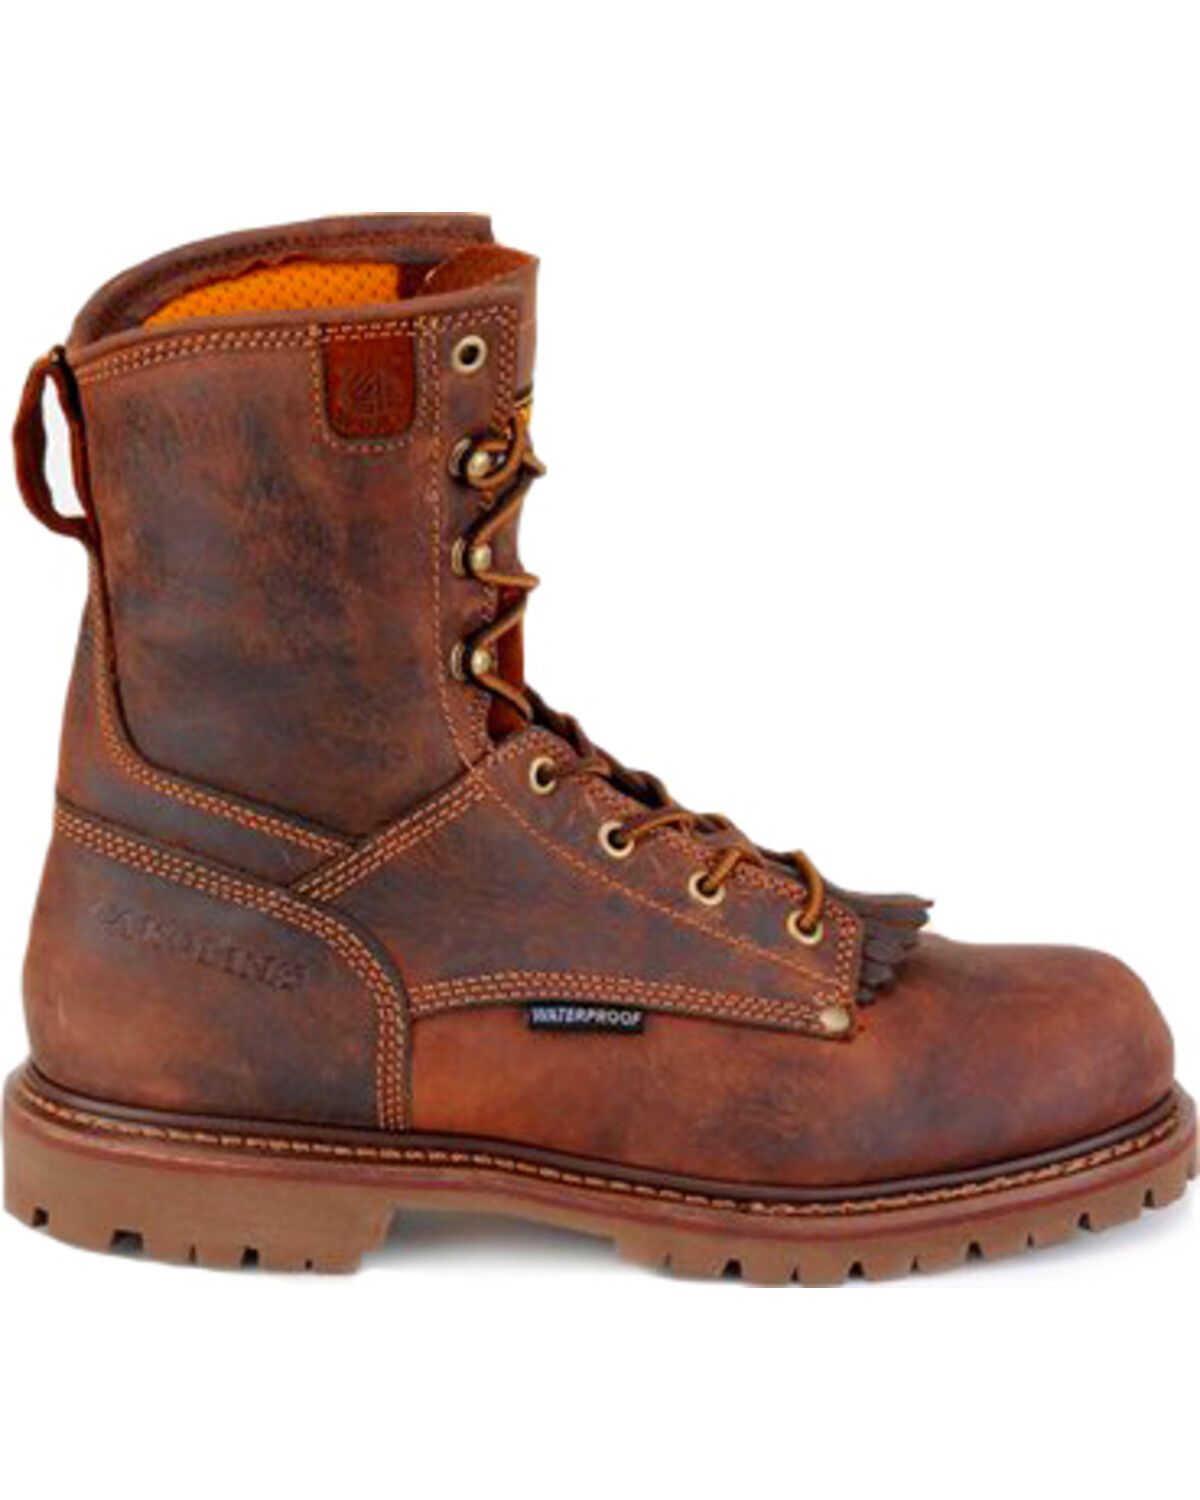 leather work boots steel toe